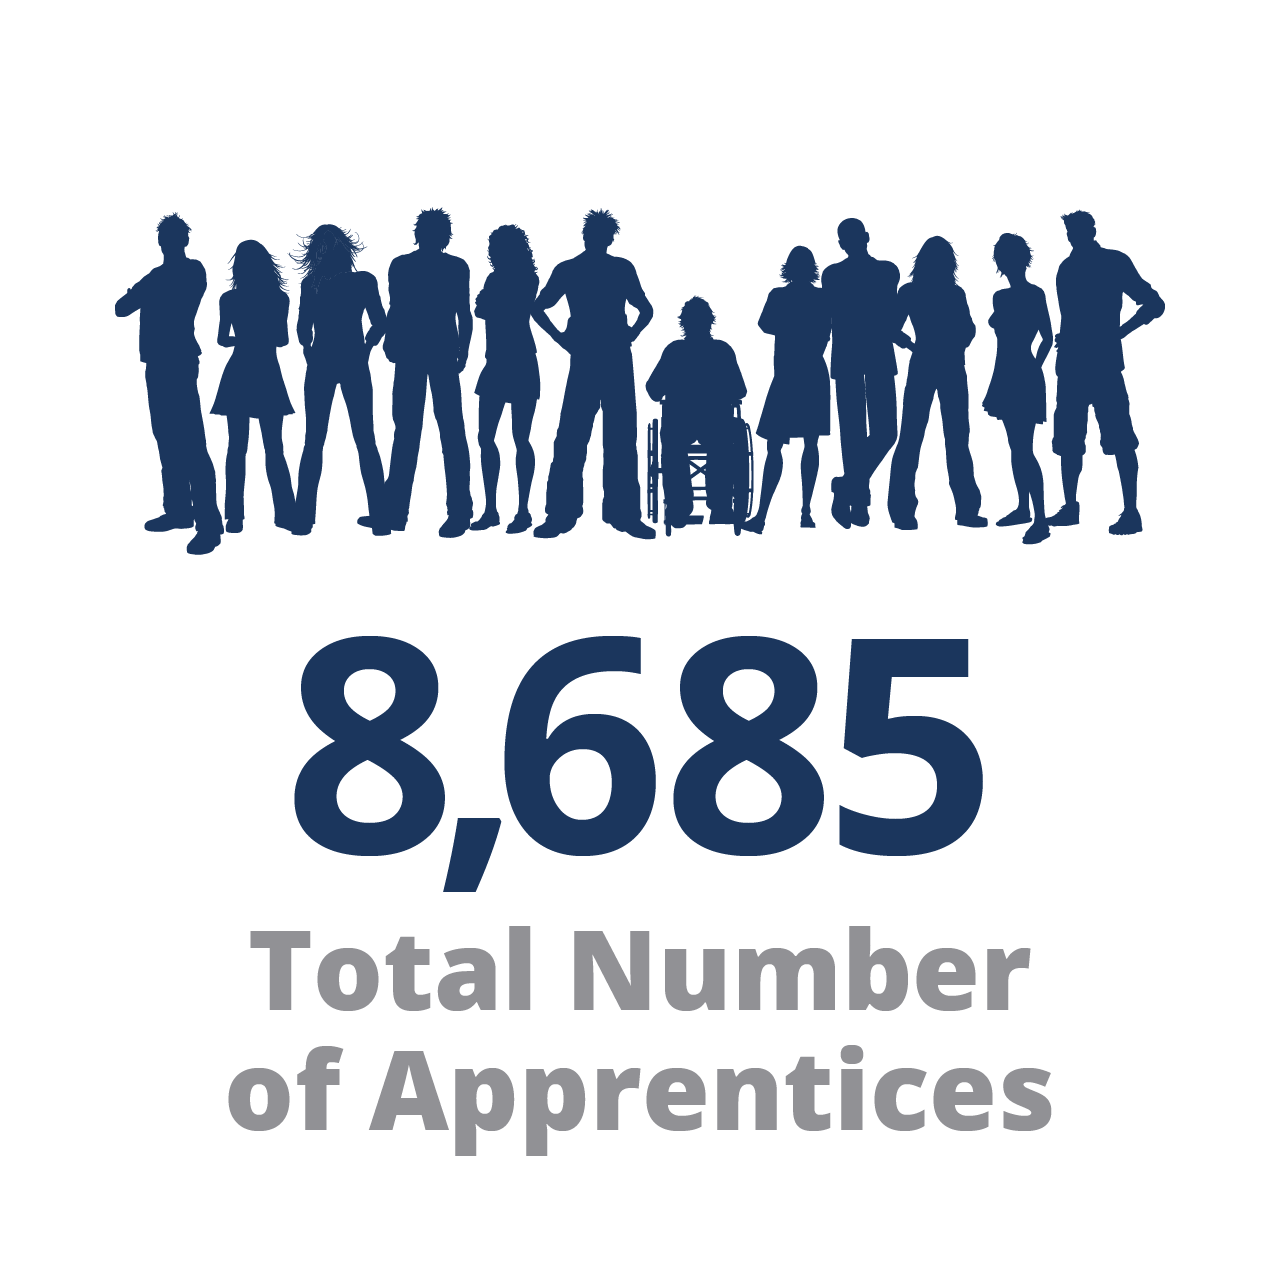 8,662 Total Number of Apprentices